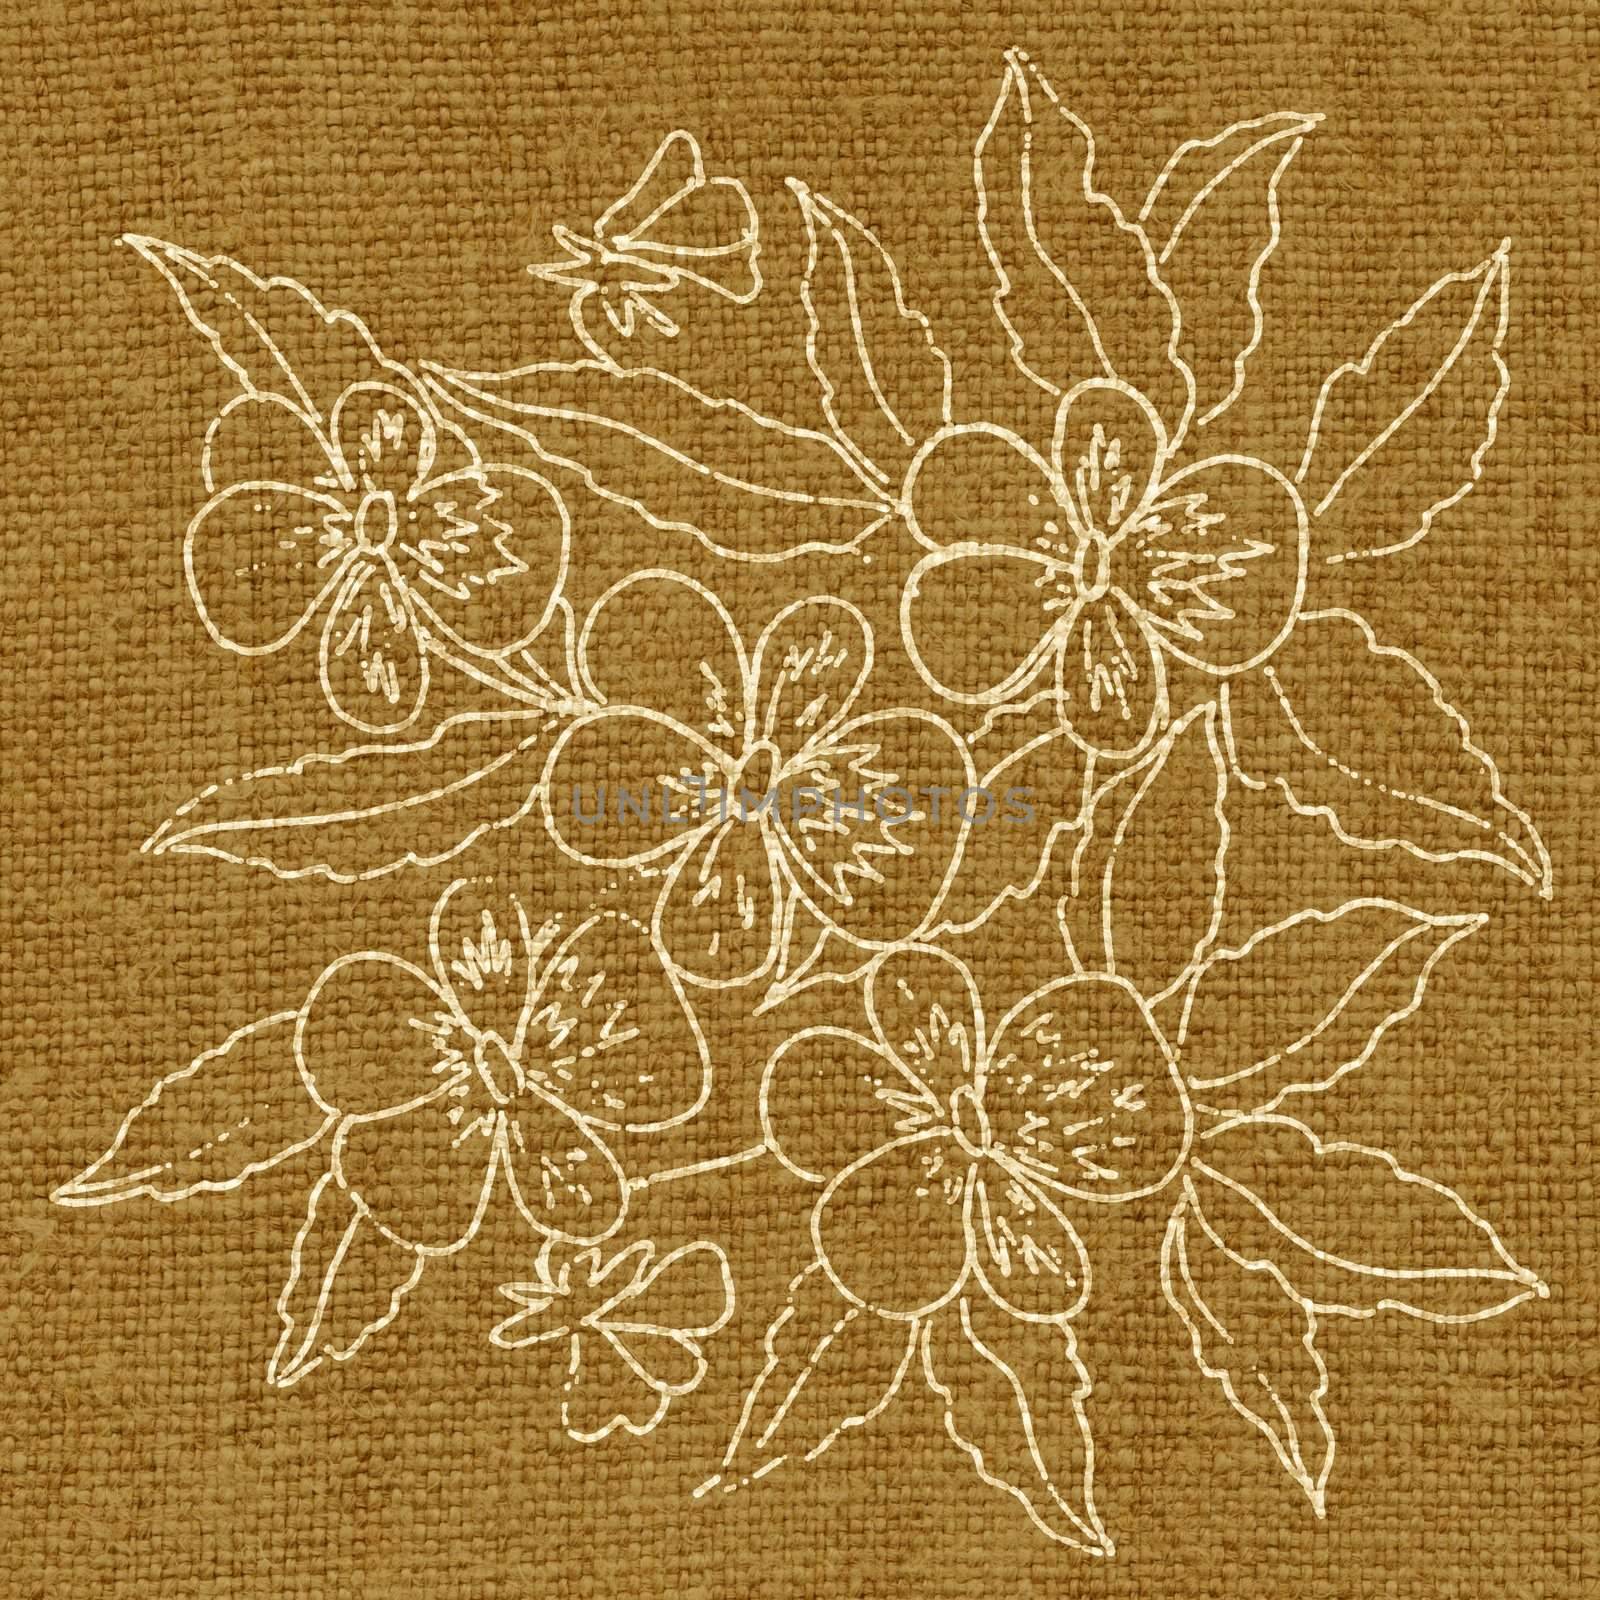 Abstract artistic background, flower pattern on a linen canvas